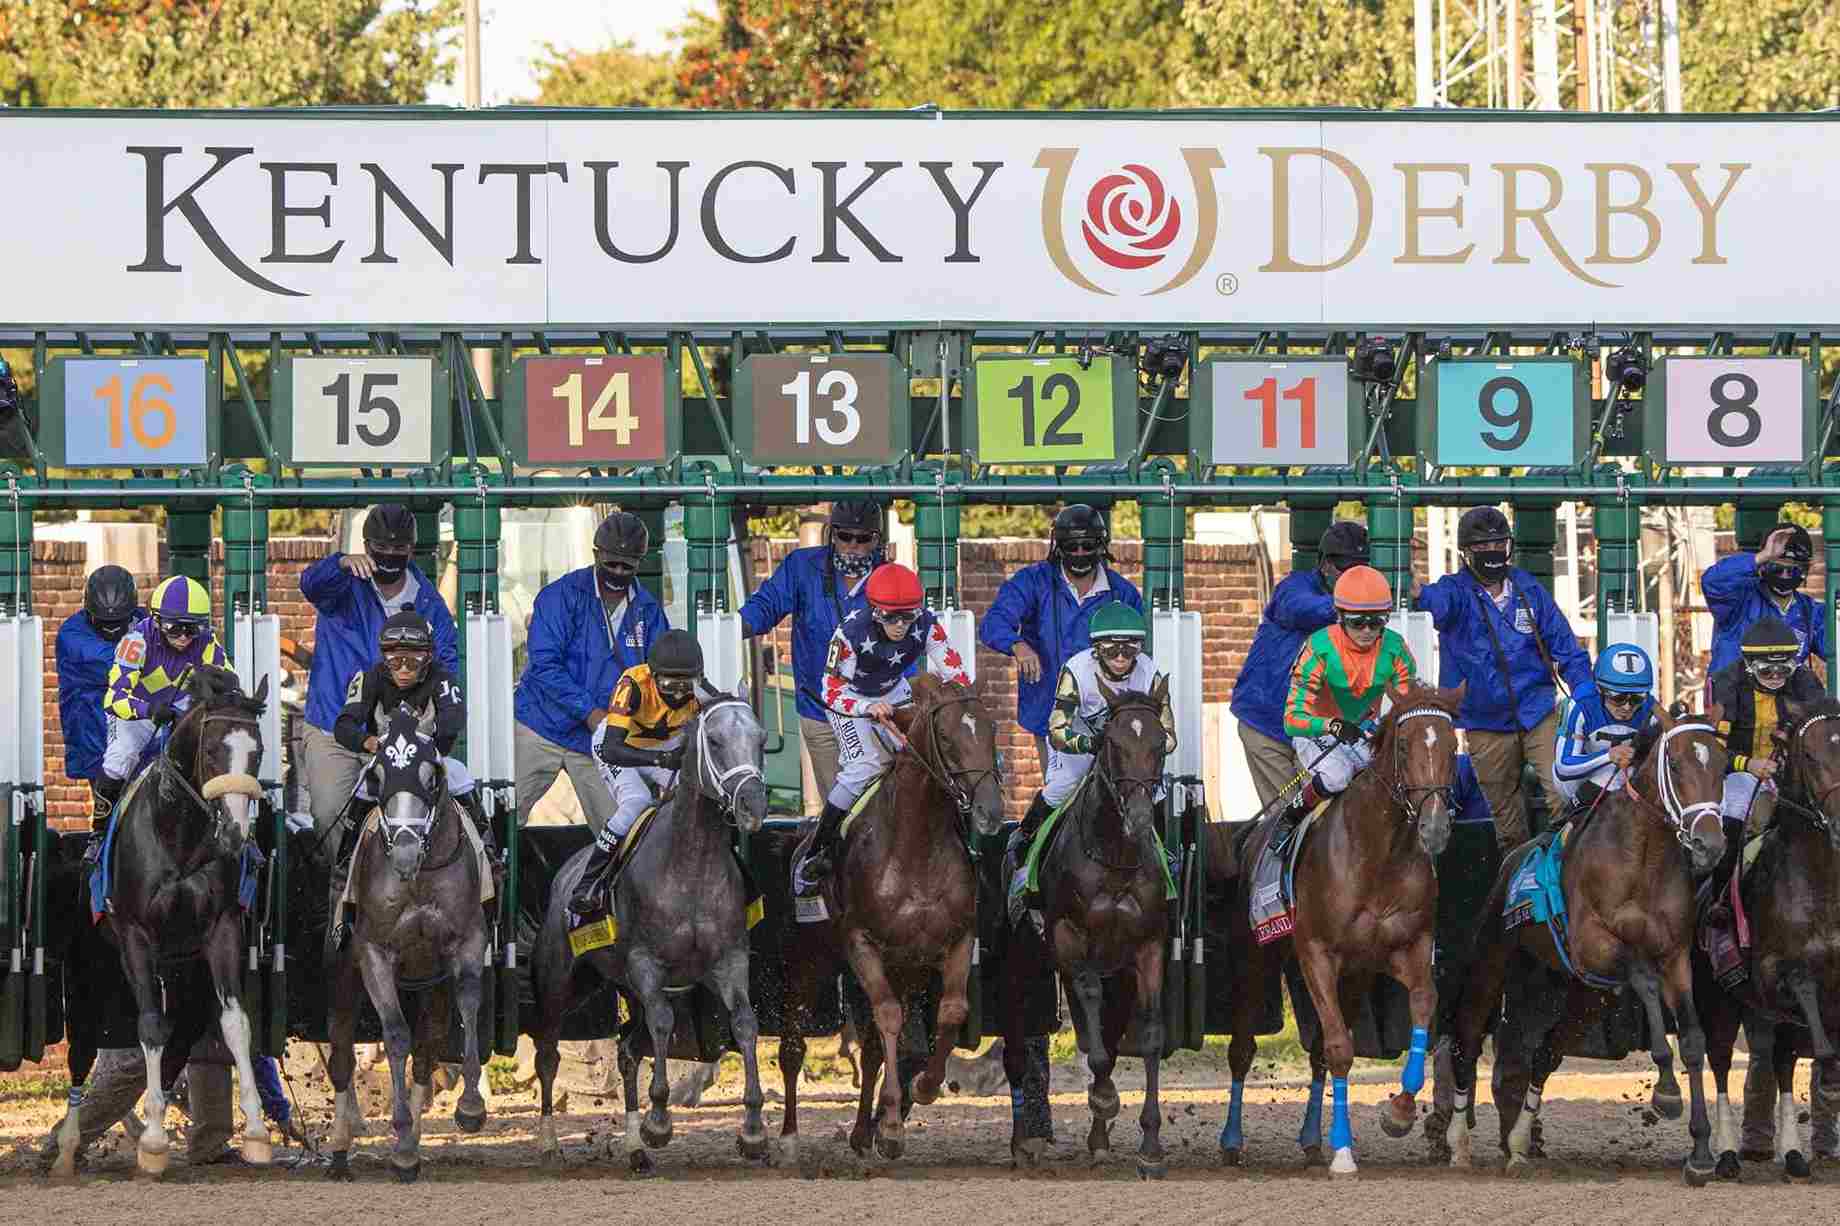 Kentucky Derby 2022 Free Bets | The Best Offshore Betting Sites